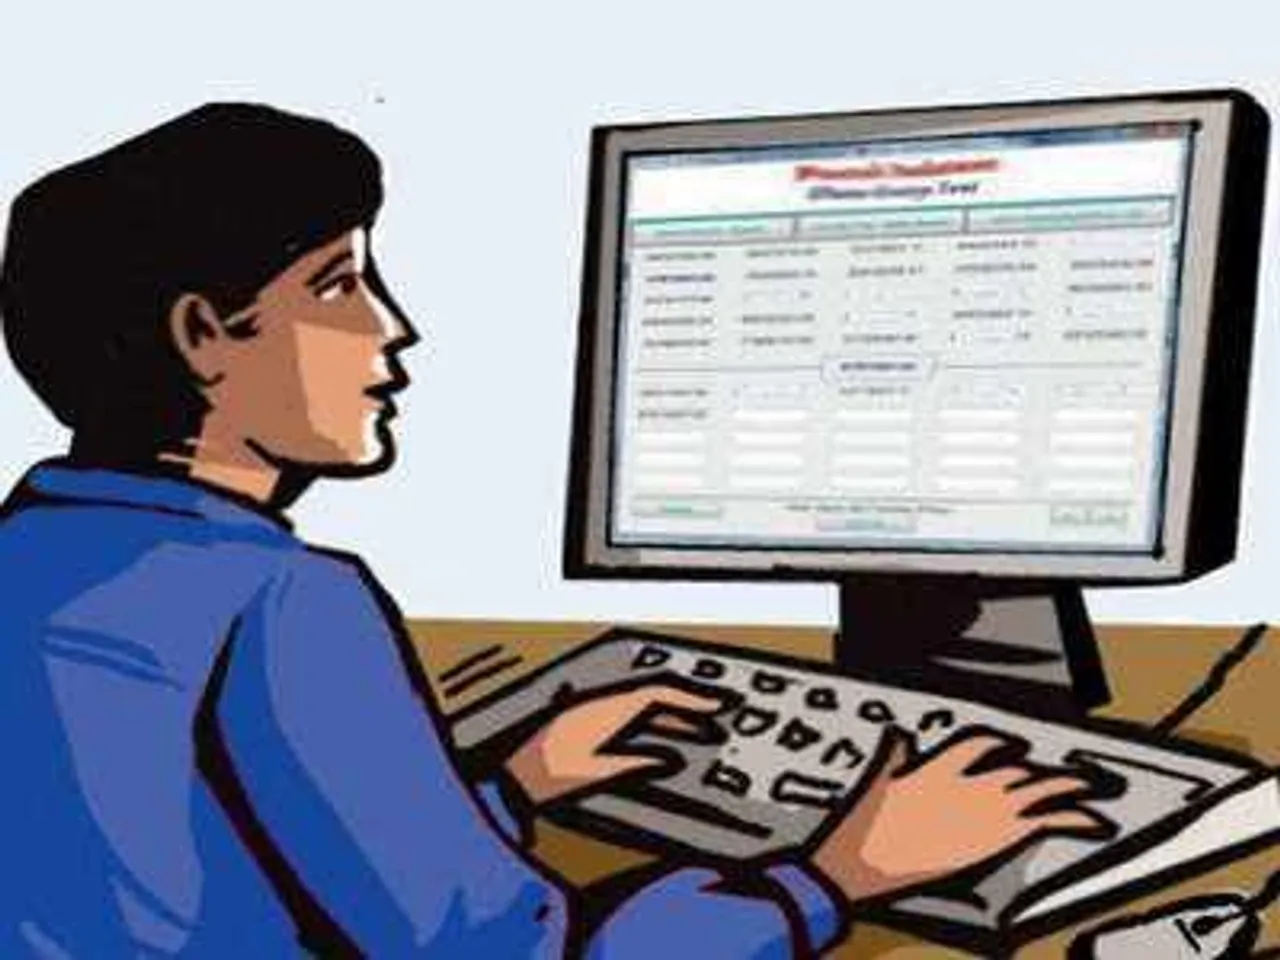 St Xavier’s PG admission test to be held online